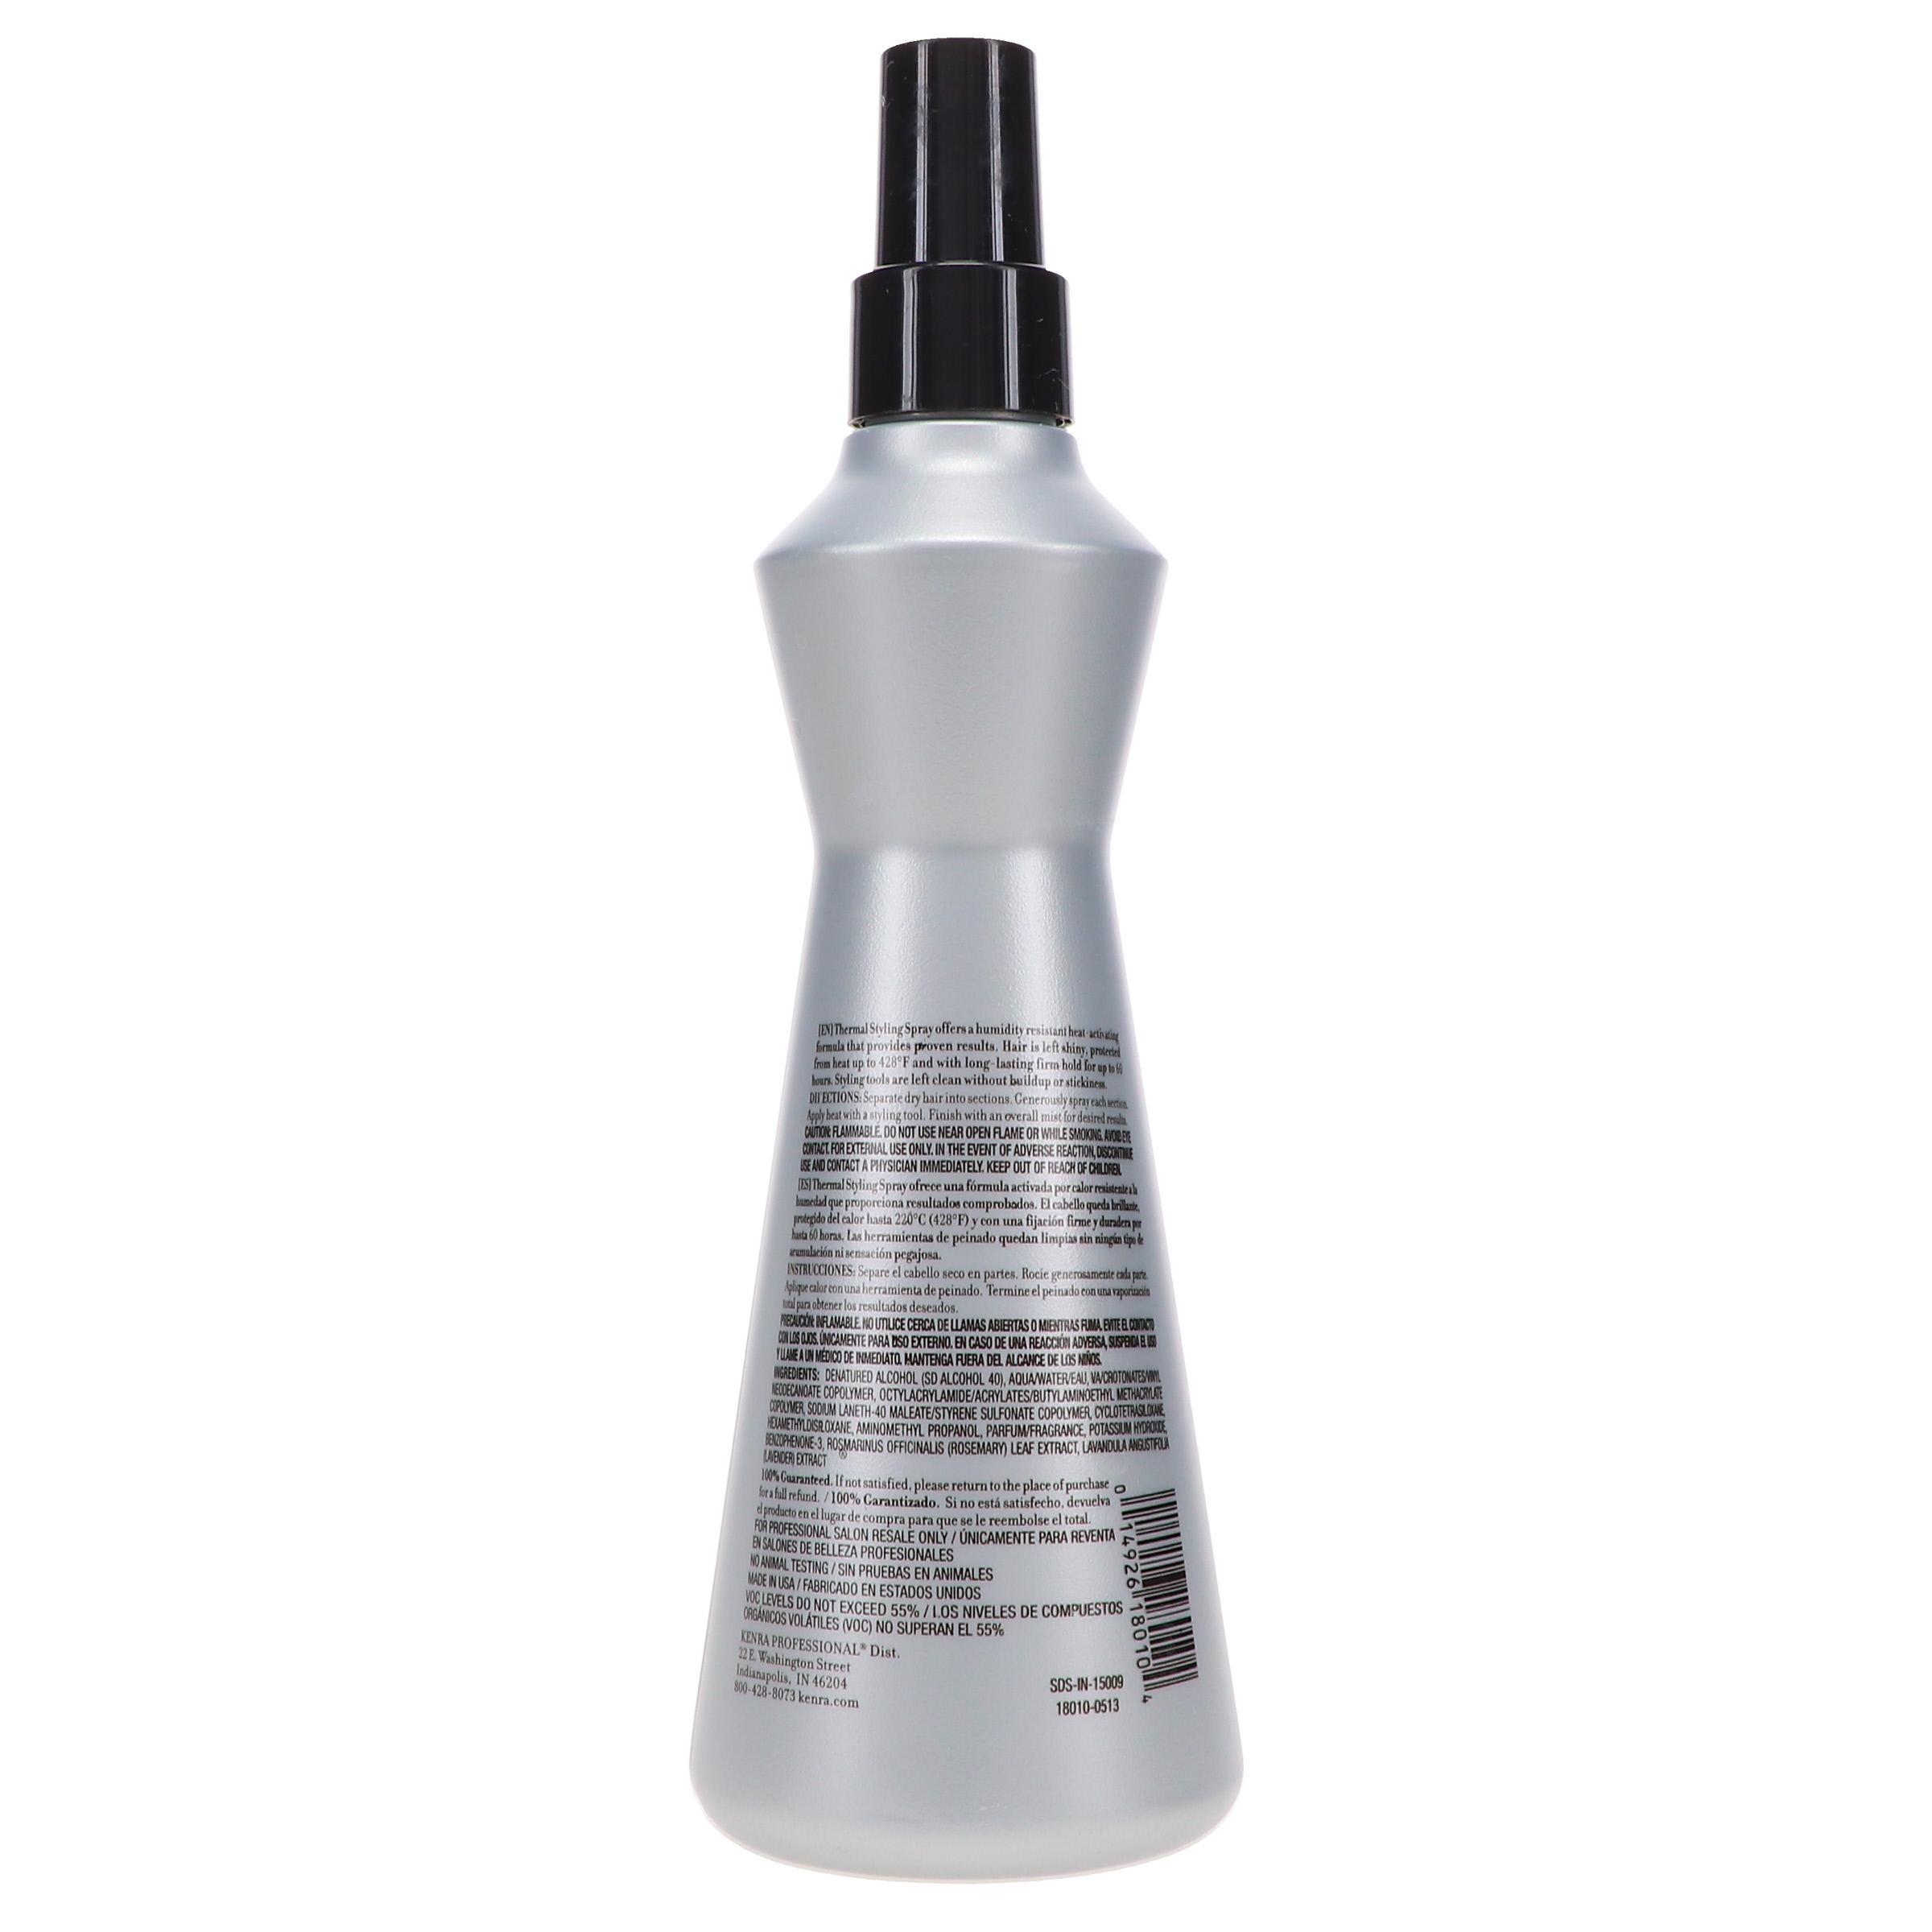 Kenra Thermal Styling Spray #19 10.1 oz - image 5 of 8